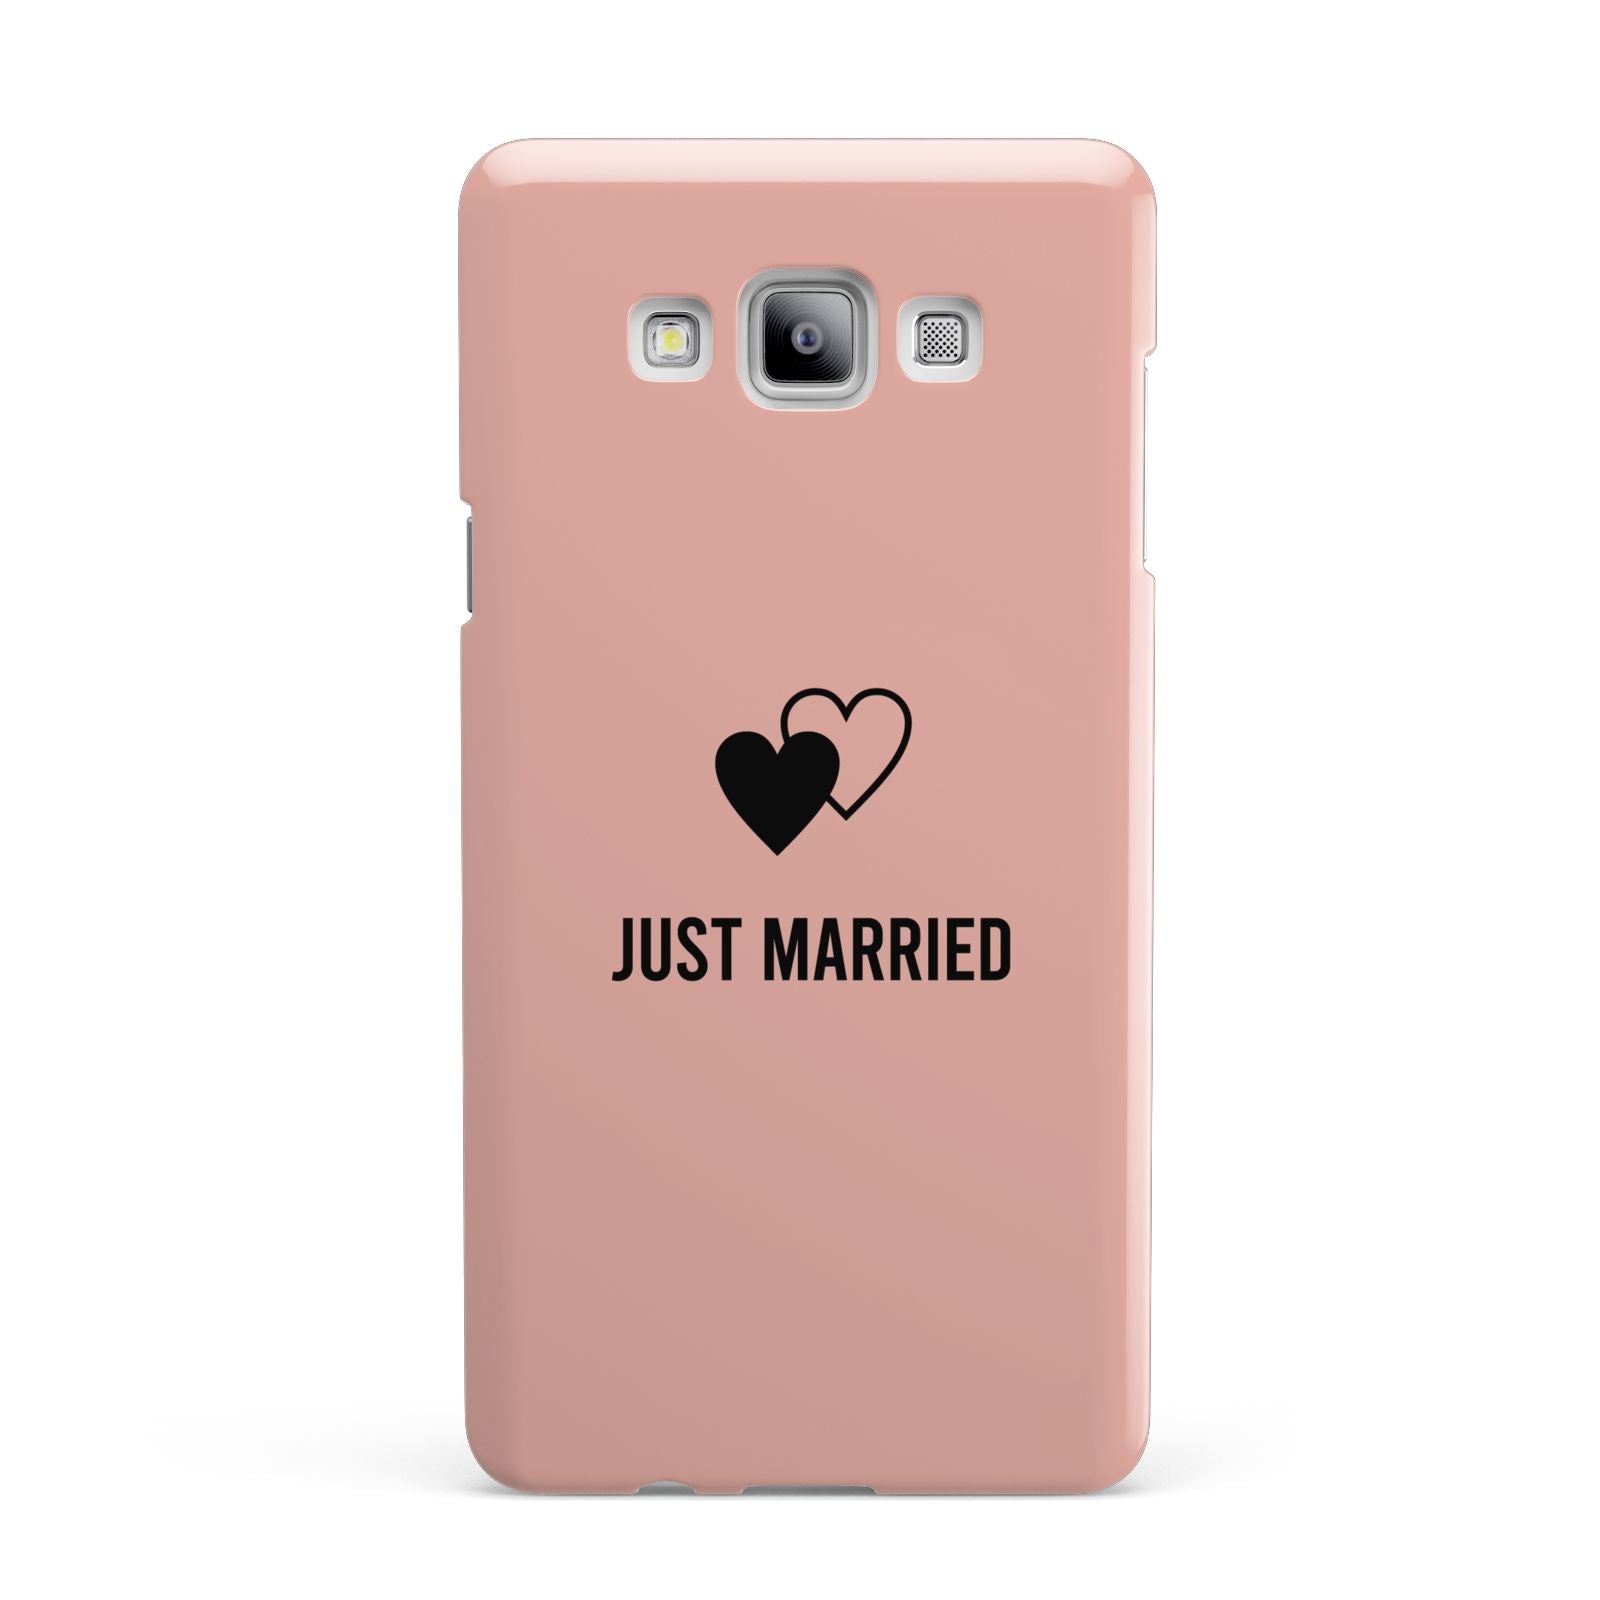 Just Married Samsung Galaxy A7 2015 Case